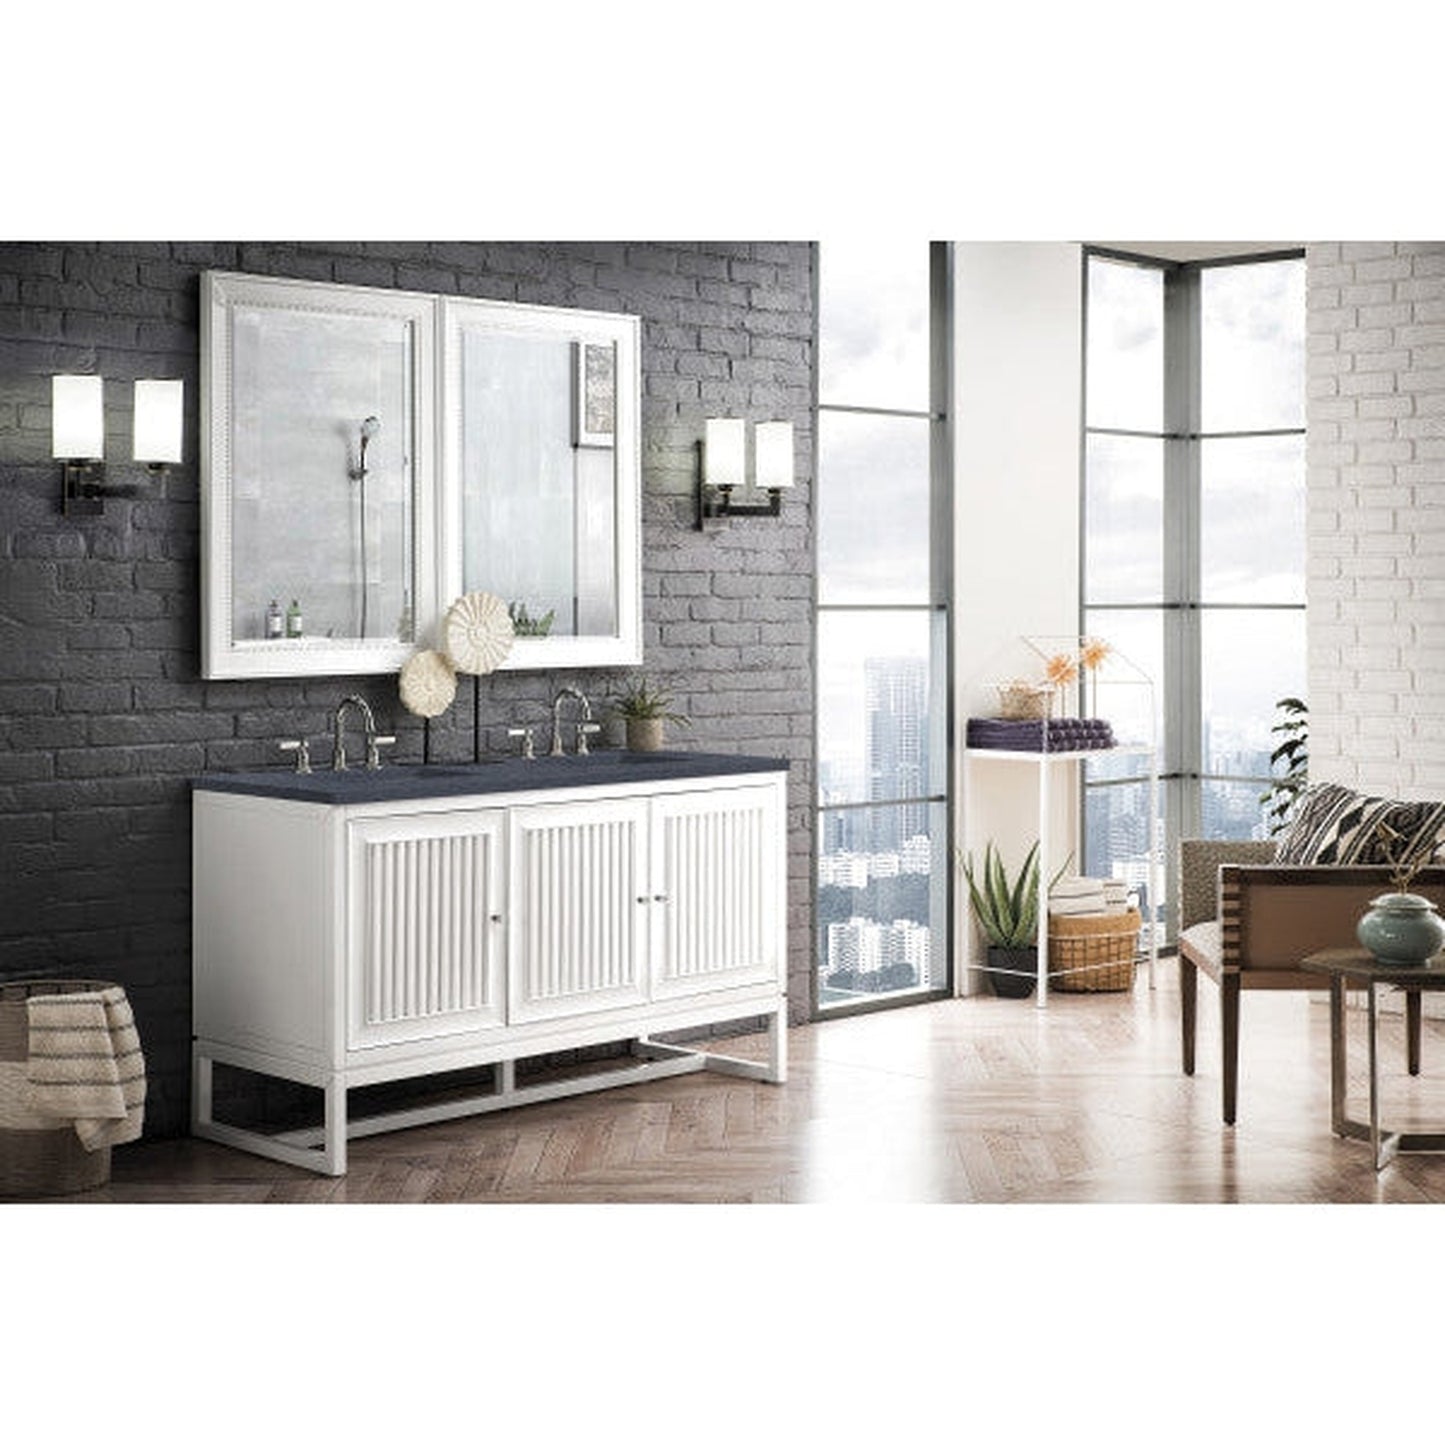 James Martin Athens 60" Double Glossy White Bathroom Vanity With 1" Charcoal Soapstone Quartz Top and Rectangular Ceramic Sink